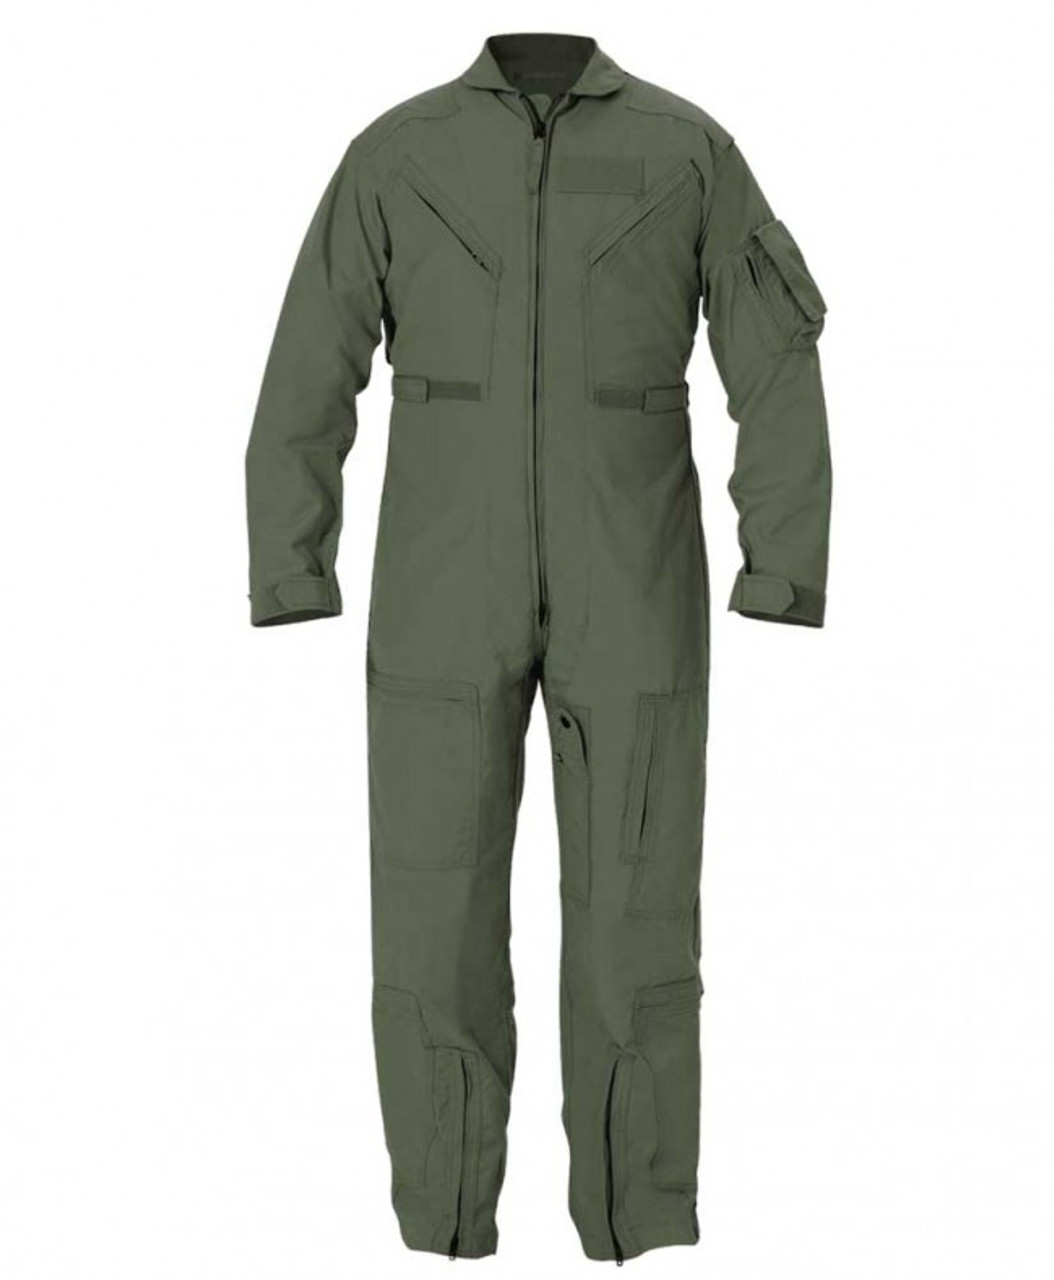 Original German Army Aramid Fiber Flight Suit Coverall Pilot Fighter Sage  Green Coveralls BW Military Issue Boilersuit -  Canada